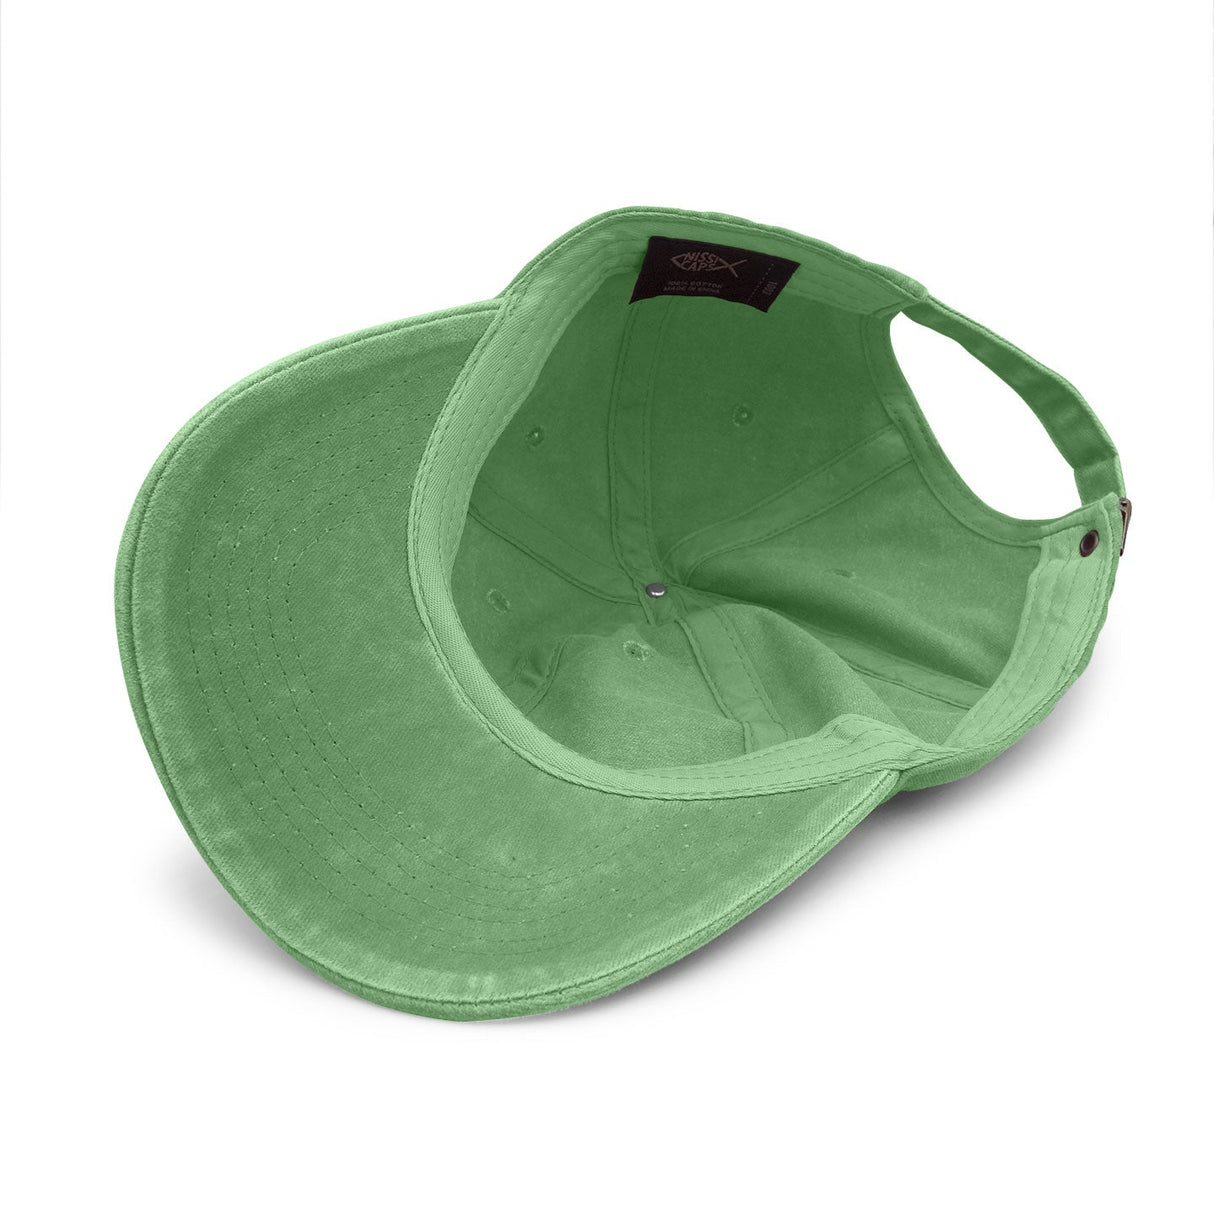 Down To Earth Club Pigment Dyed Dad Cap